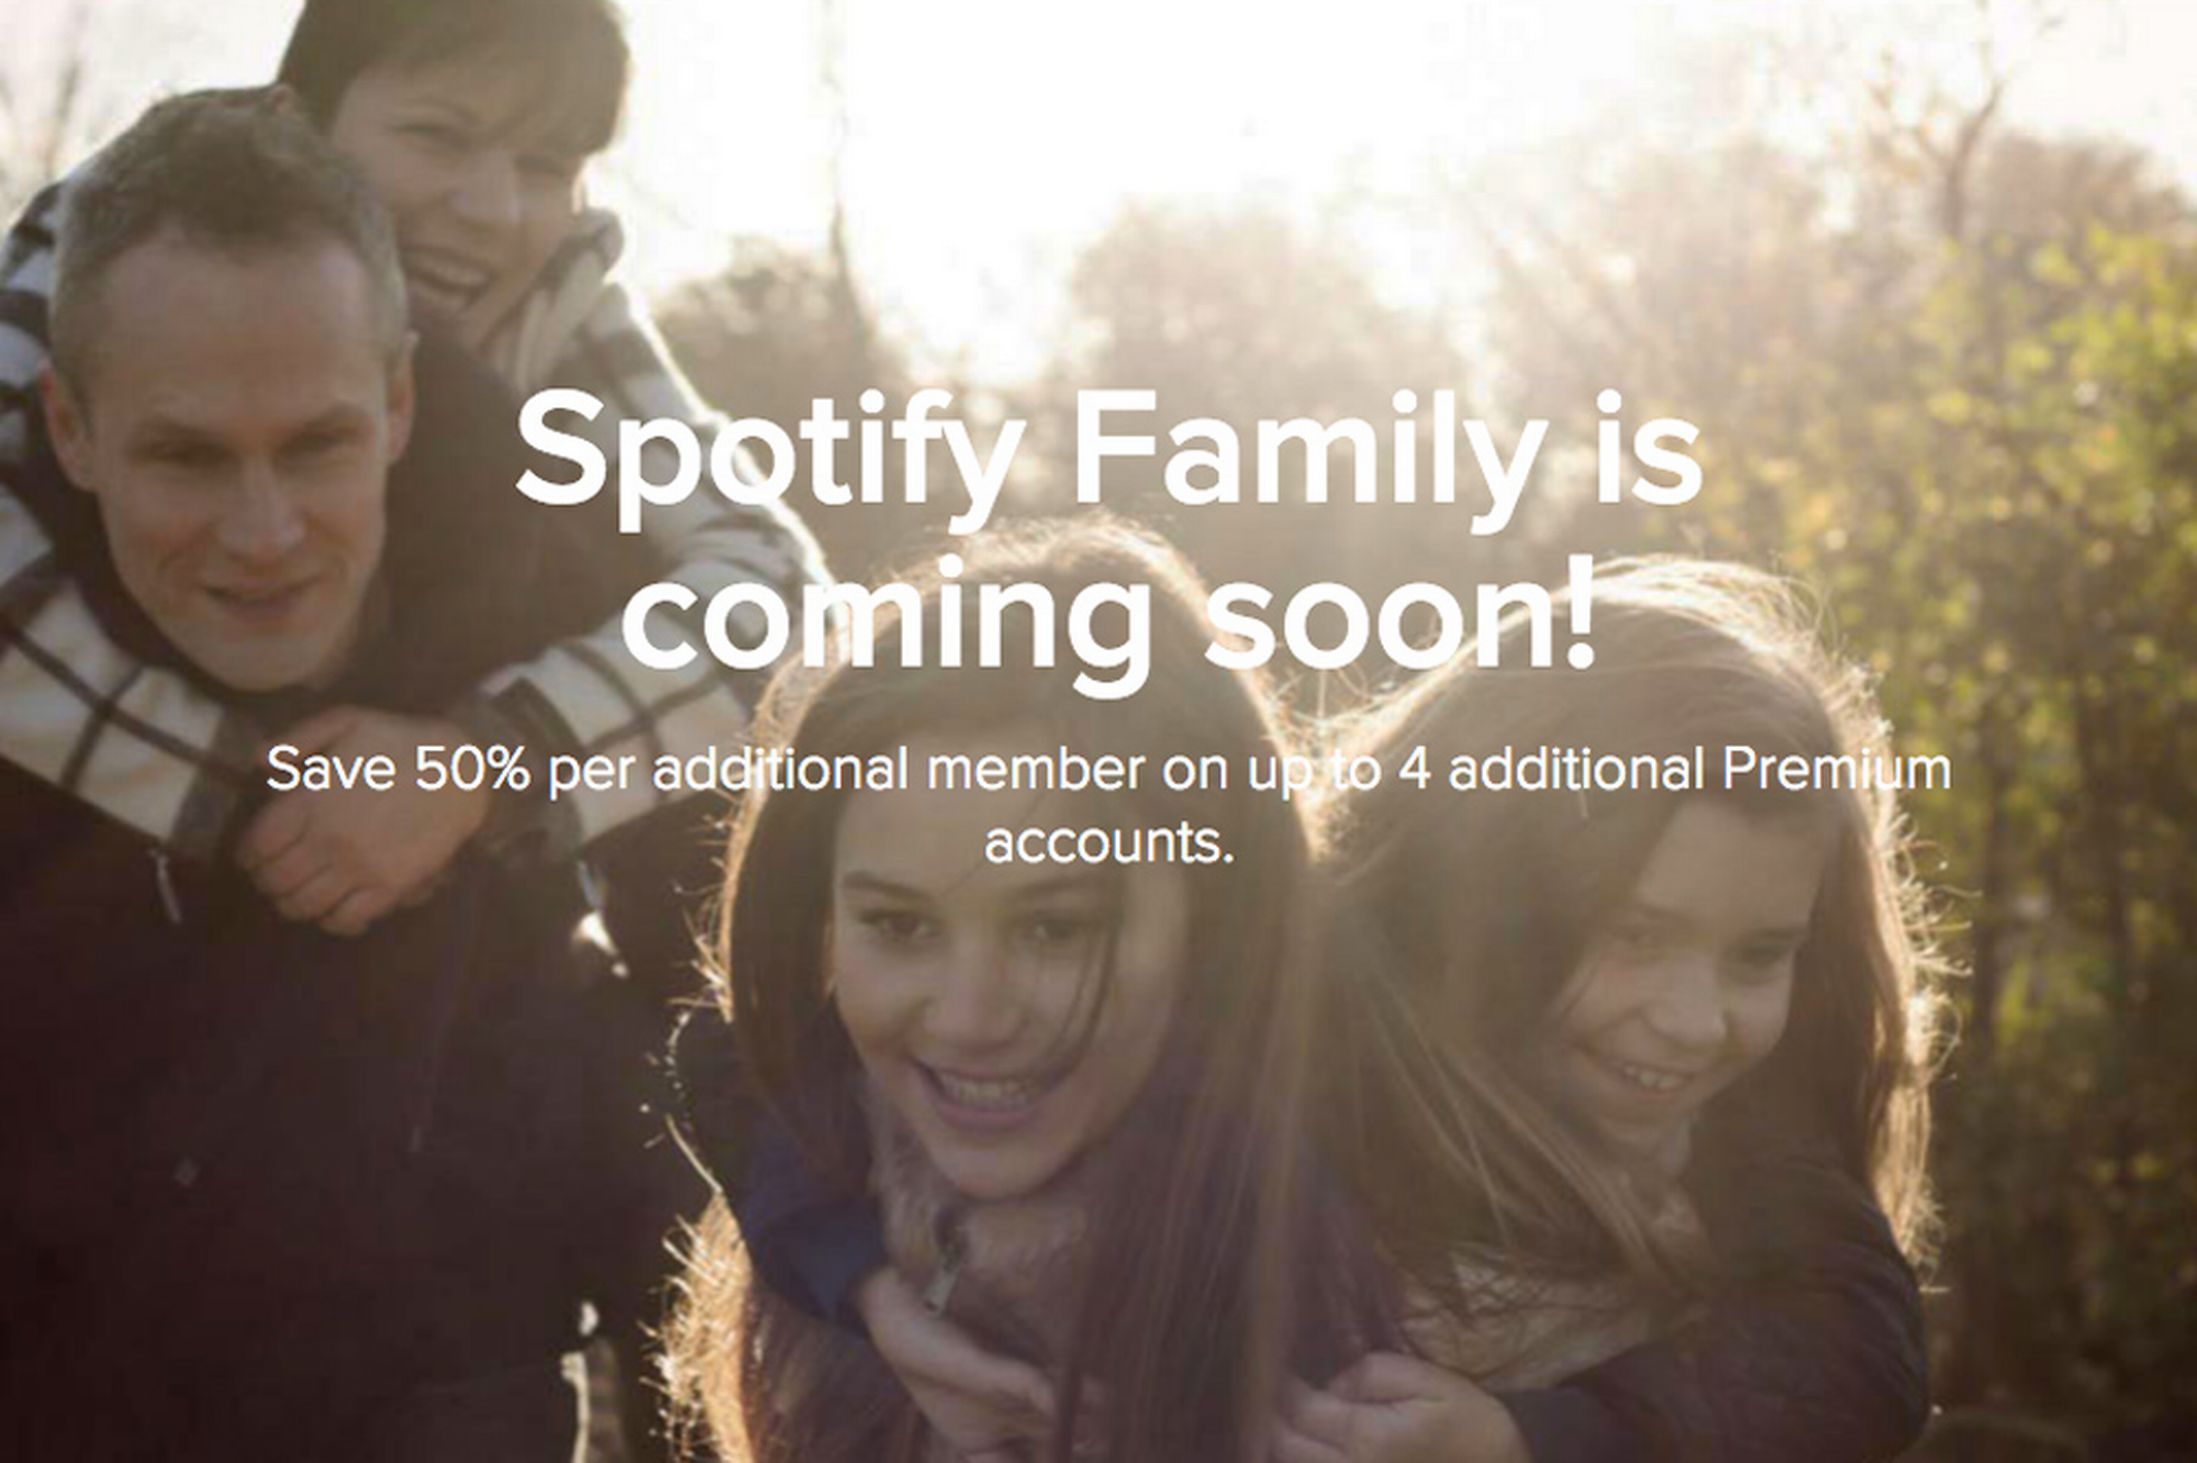 how to add someone on spotify family plan